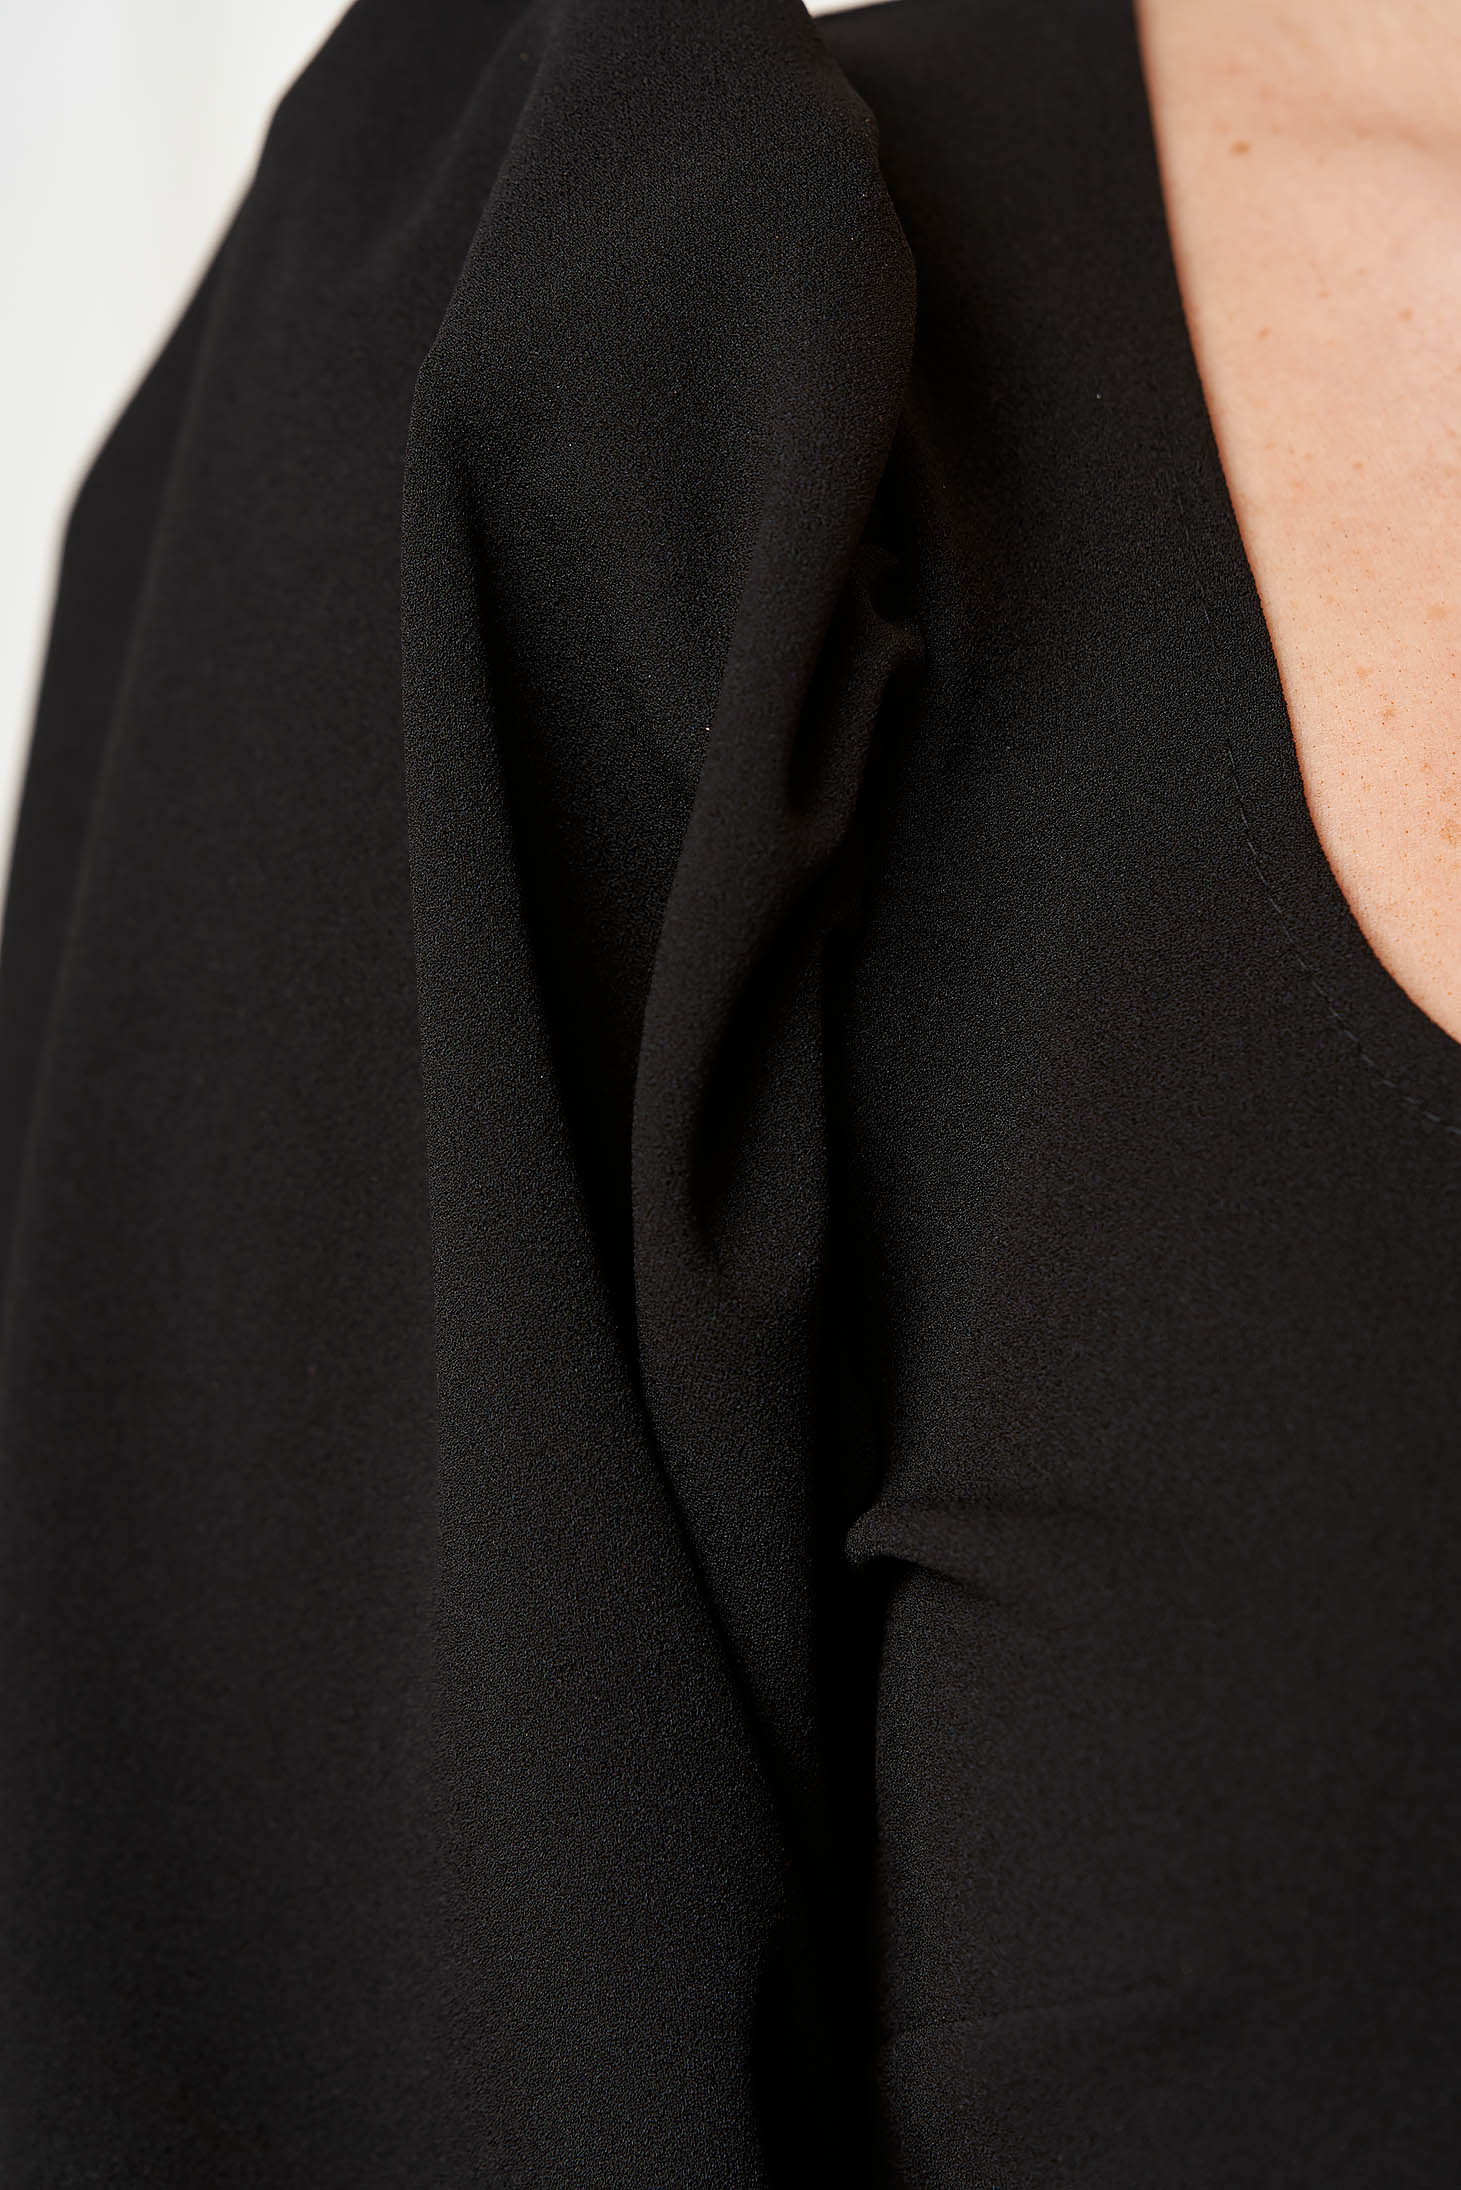 Ladies' blouse in black crepe, fitted with puffed sleeves - StarShinerS 6 - StarShinerS.com